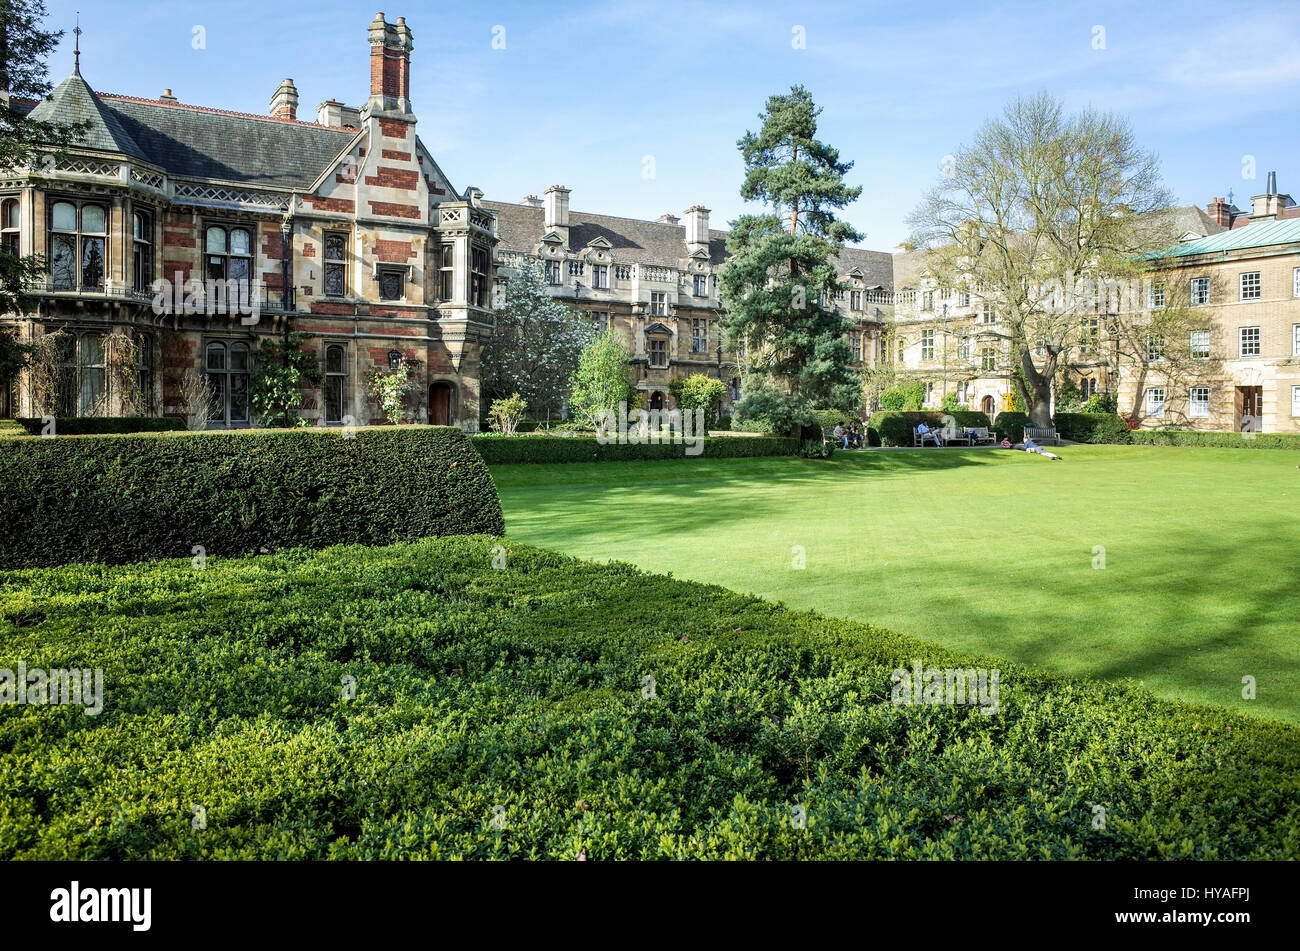 Lawns and college buildings at Pembroke College, part of the University of Cambridge, UK Stock Photo